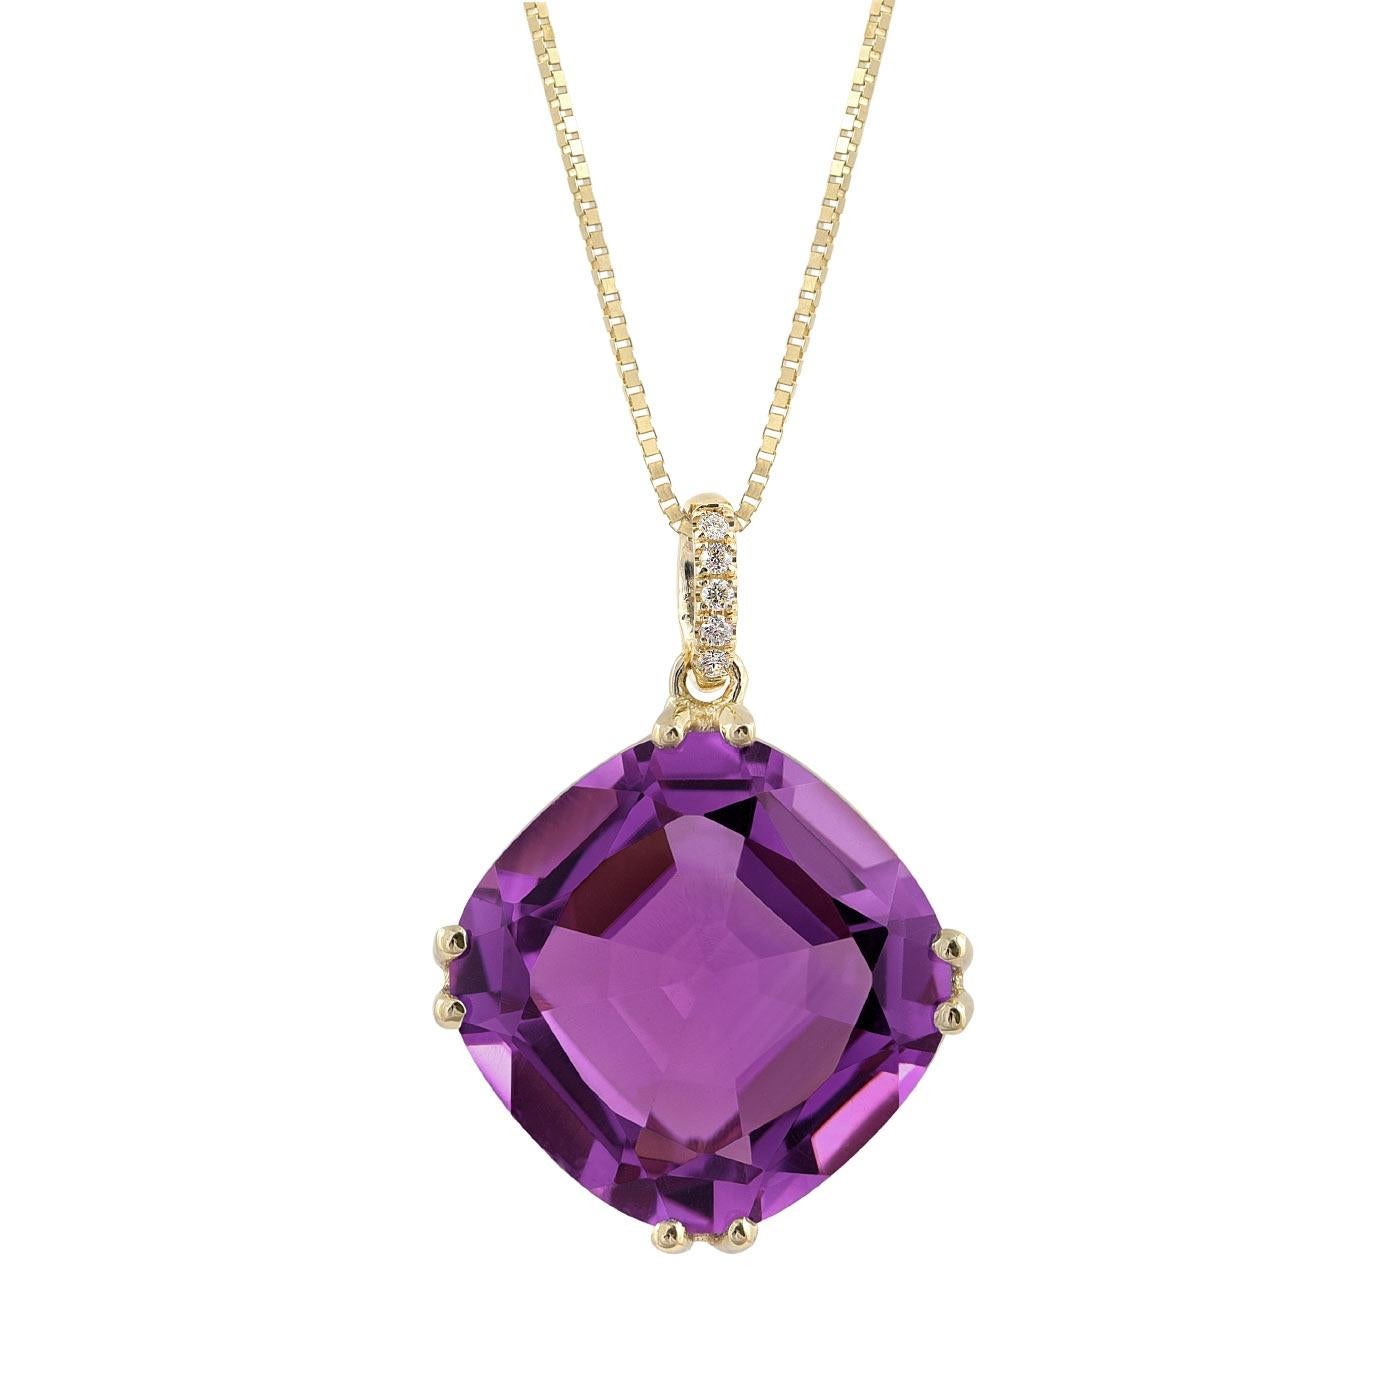 17.96 Carats Amethyst Diamonds set in 14K Yellow Gold Pendant and 18